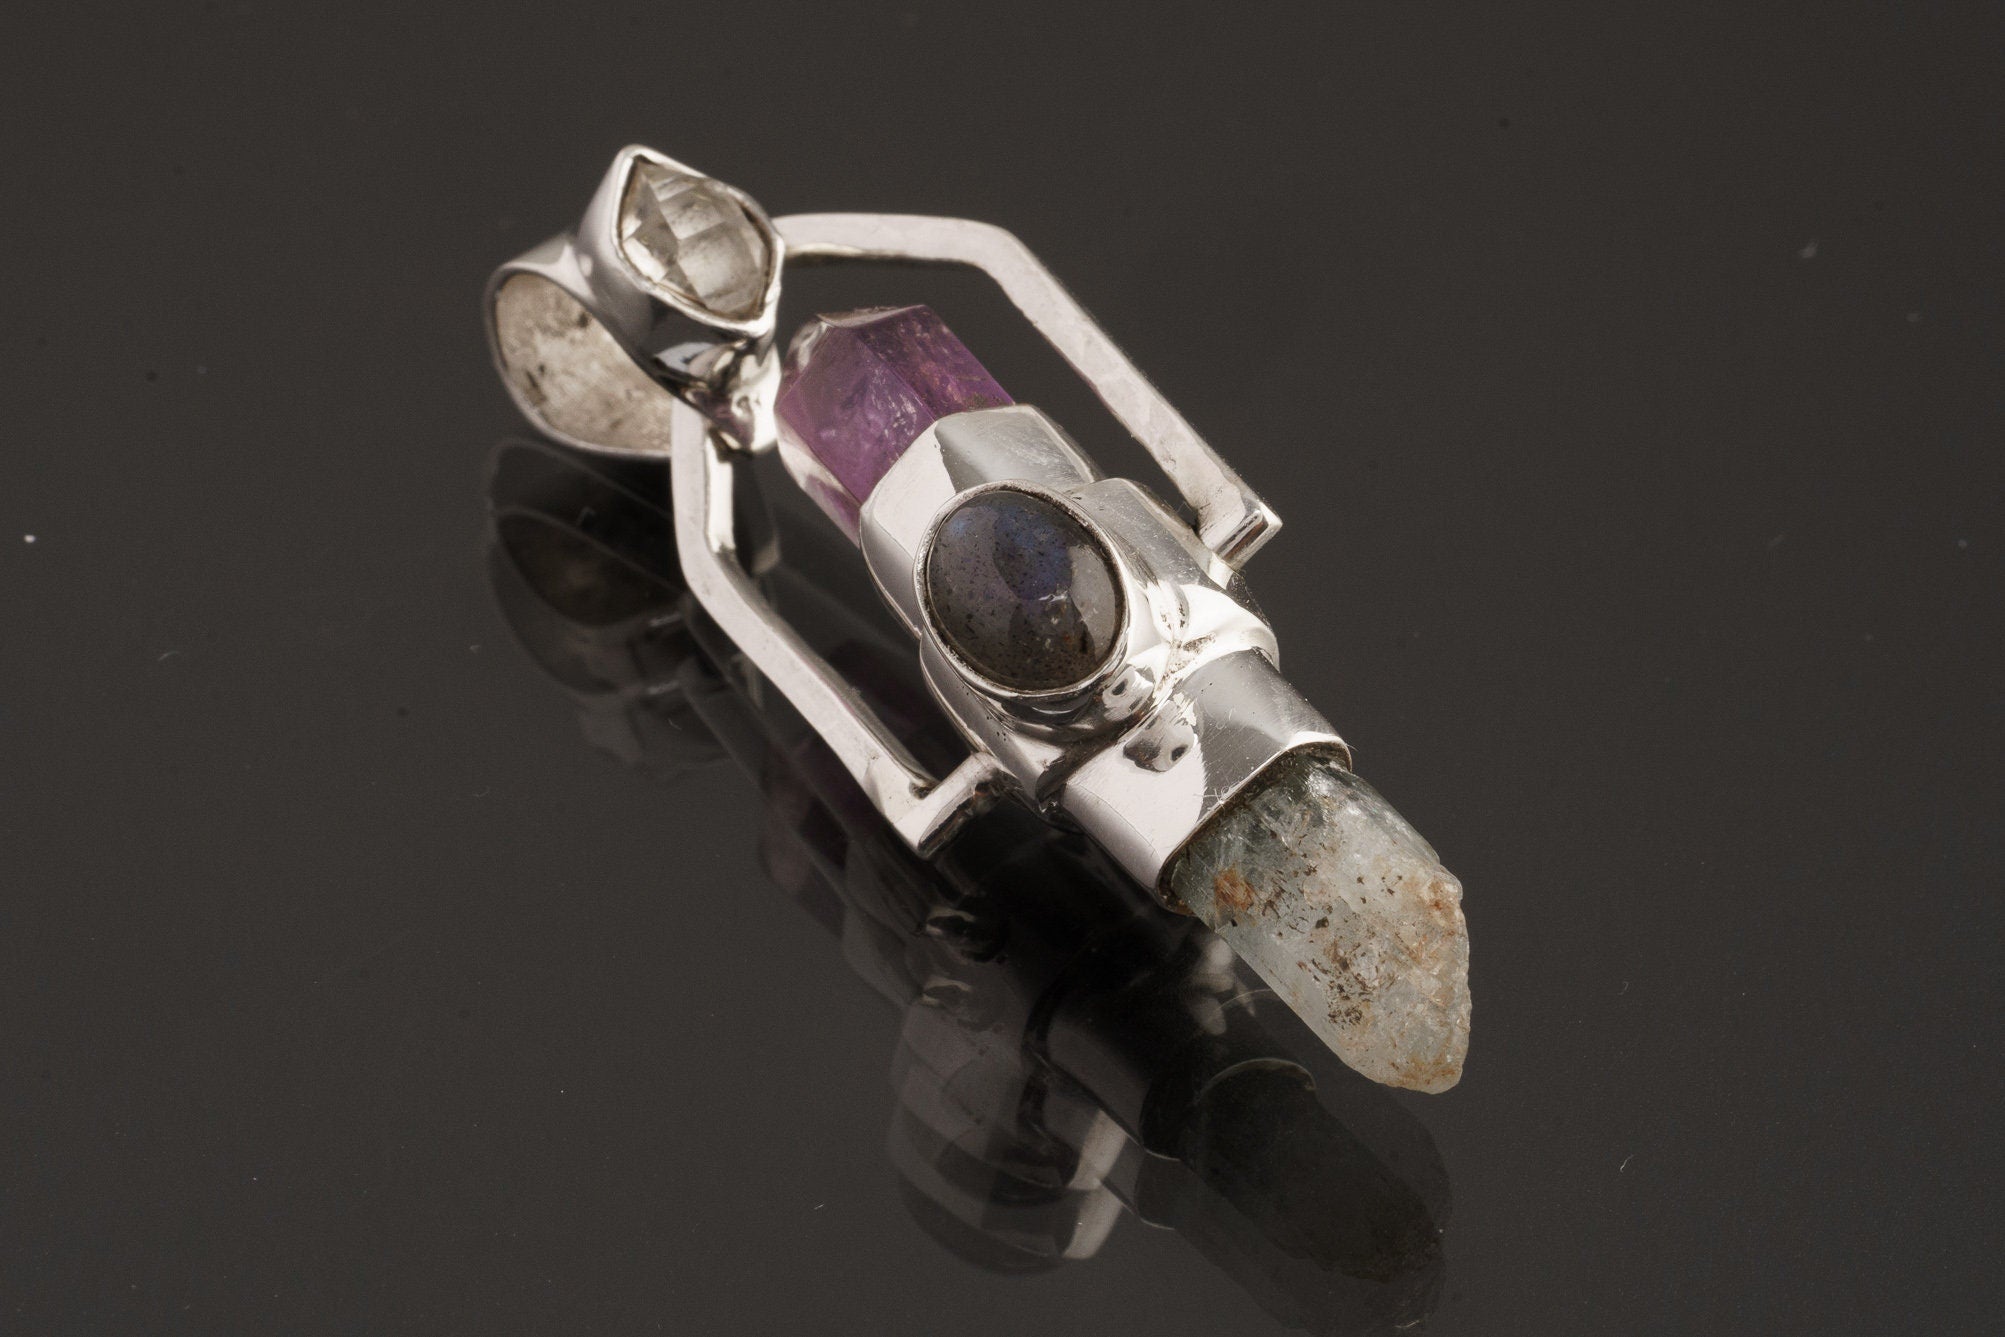 Raw Aquamarine & Generator Amethyst Point with a Herkimer Diamond, Labradorite and Apatite - Sterling Silver Set - Spinning Crystal Pendant